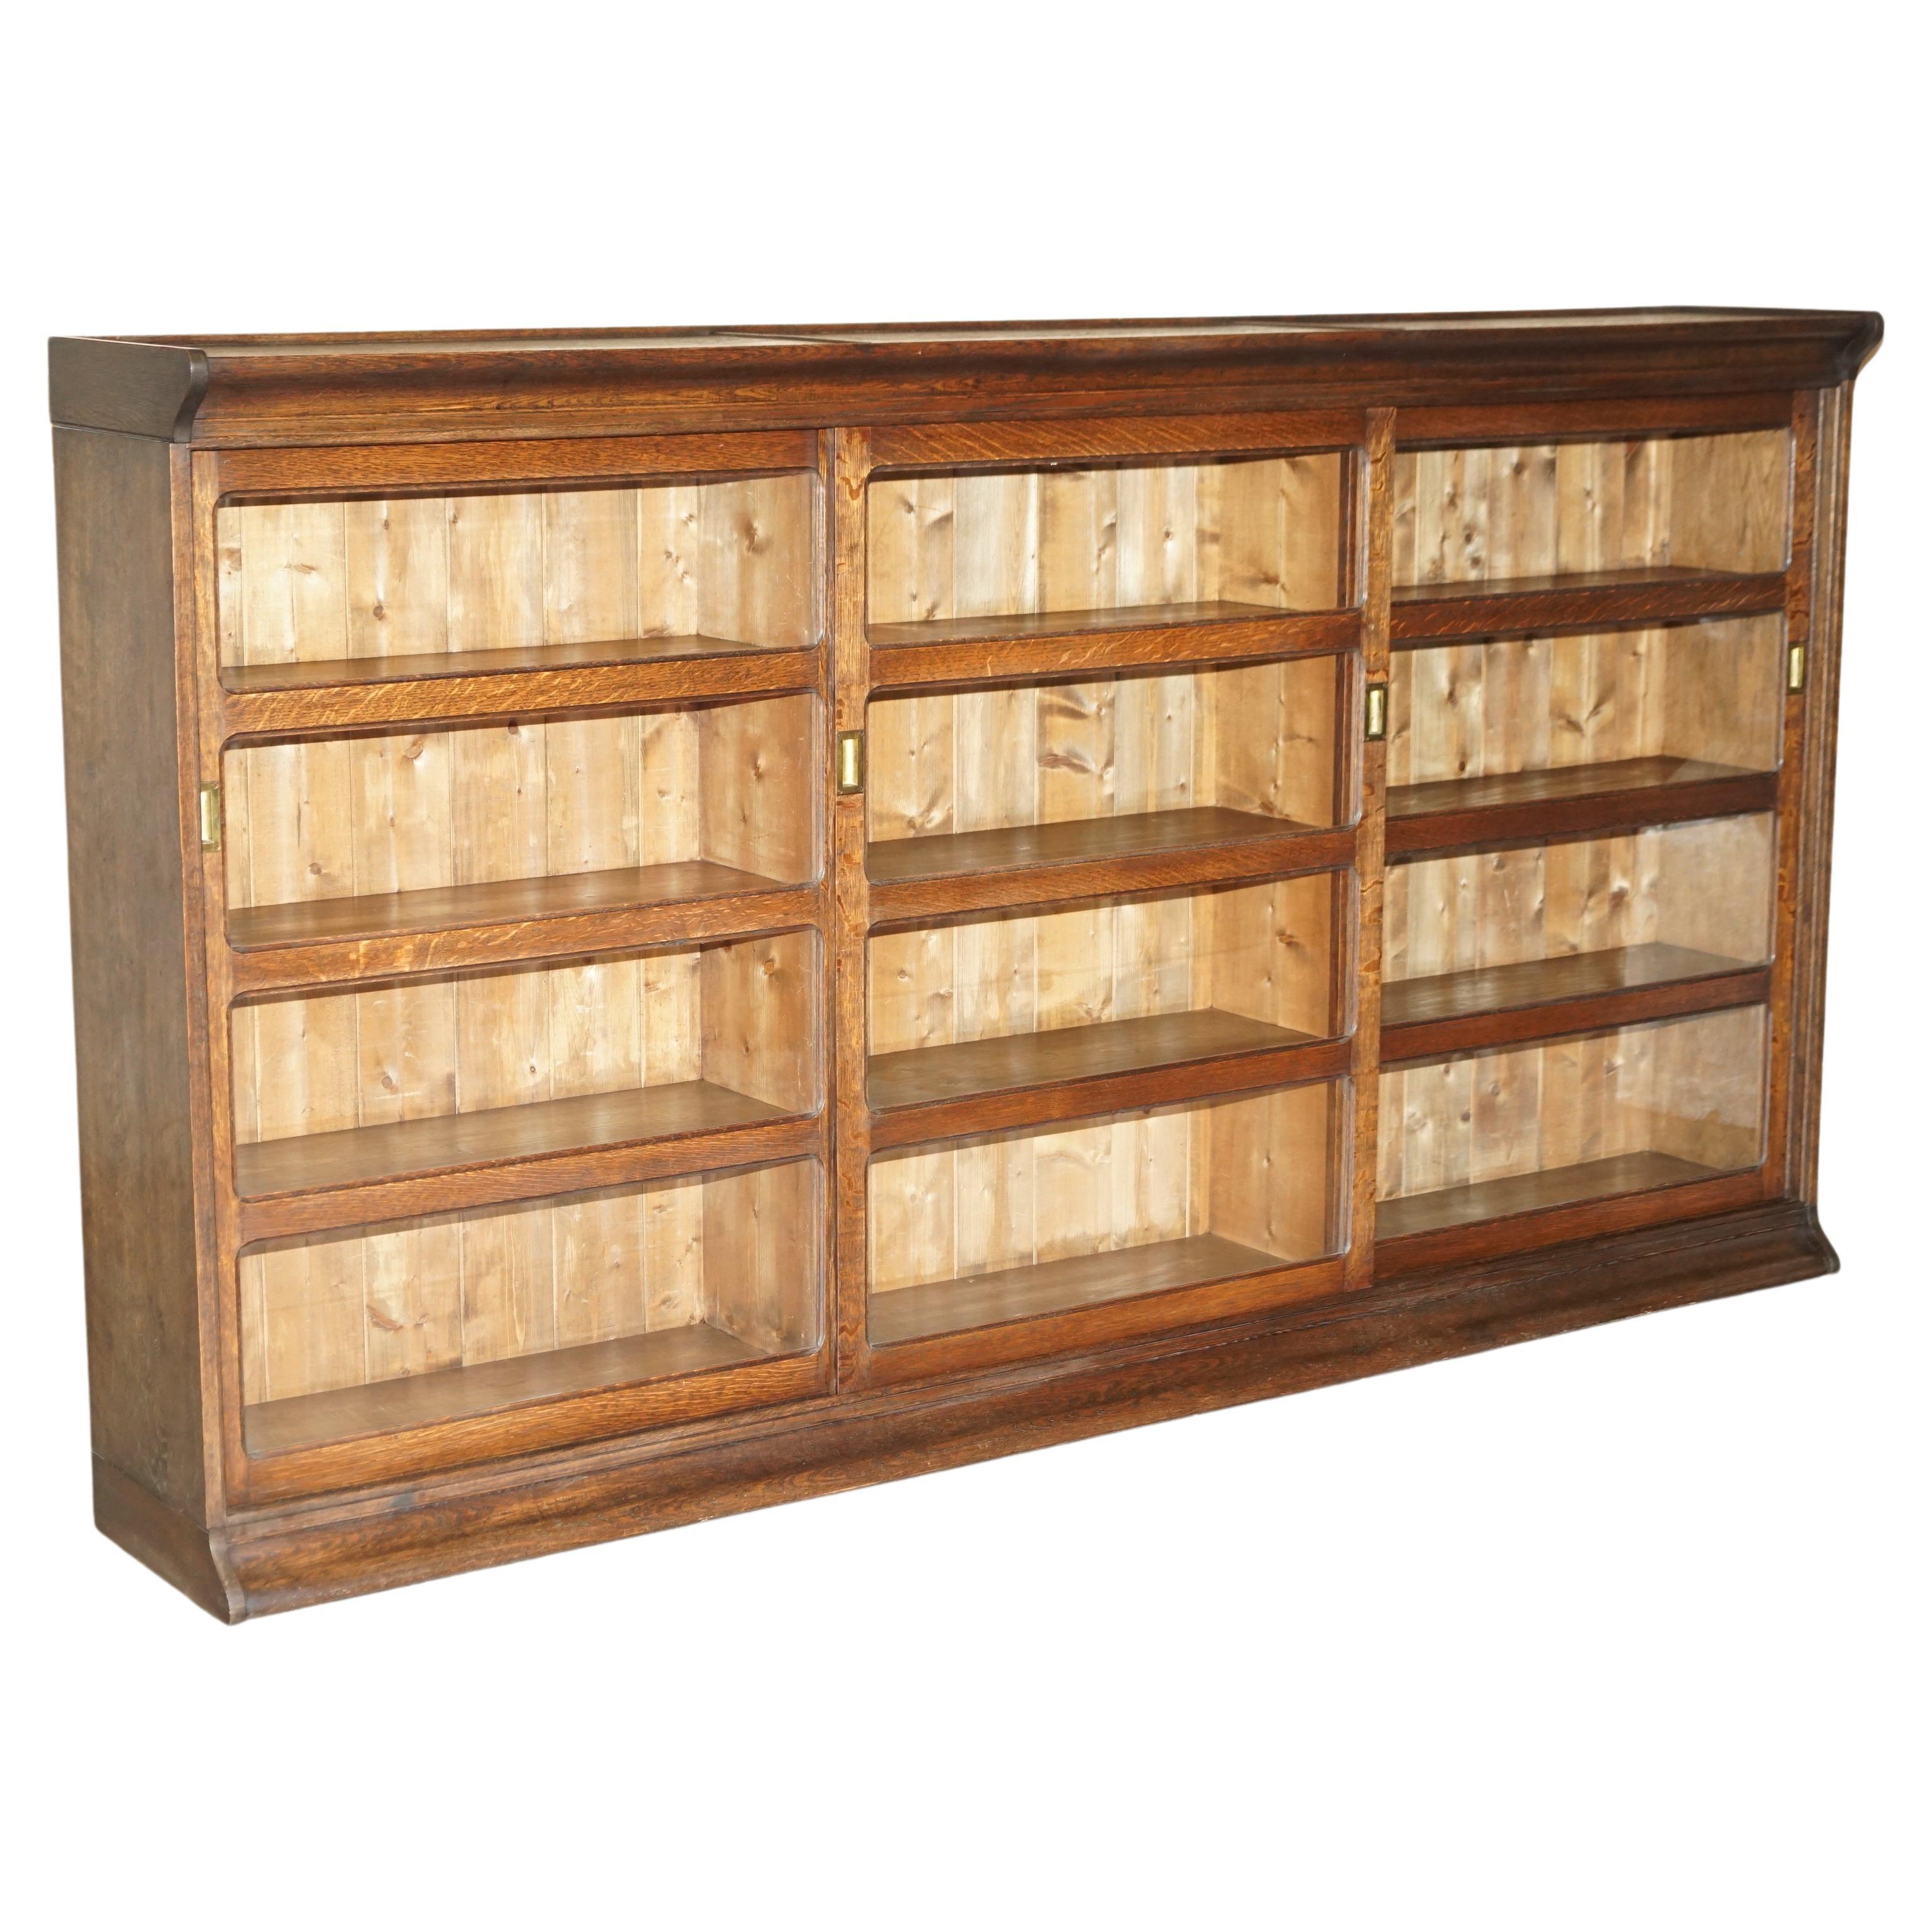 Victorian Oak Haberdashery Apothecary Glazed Door Library Bookcase Sideboard For Sale